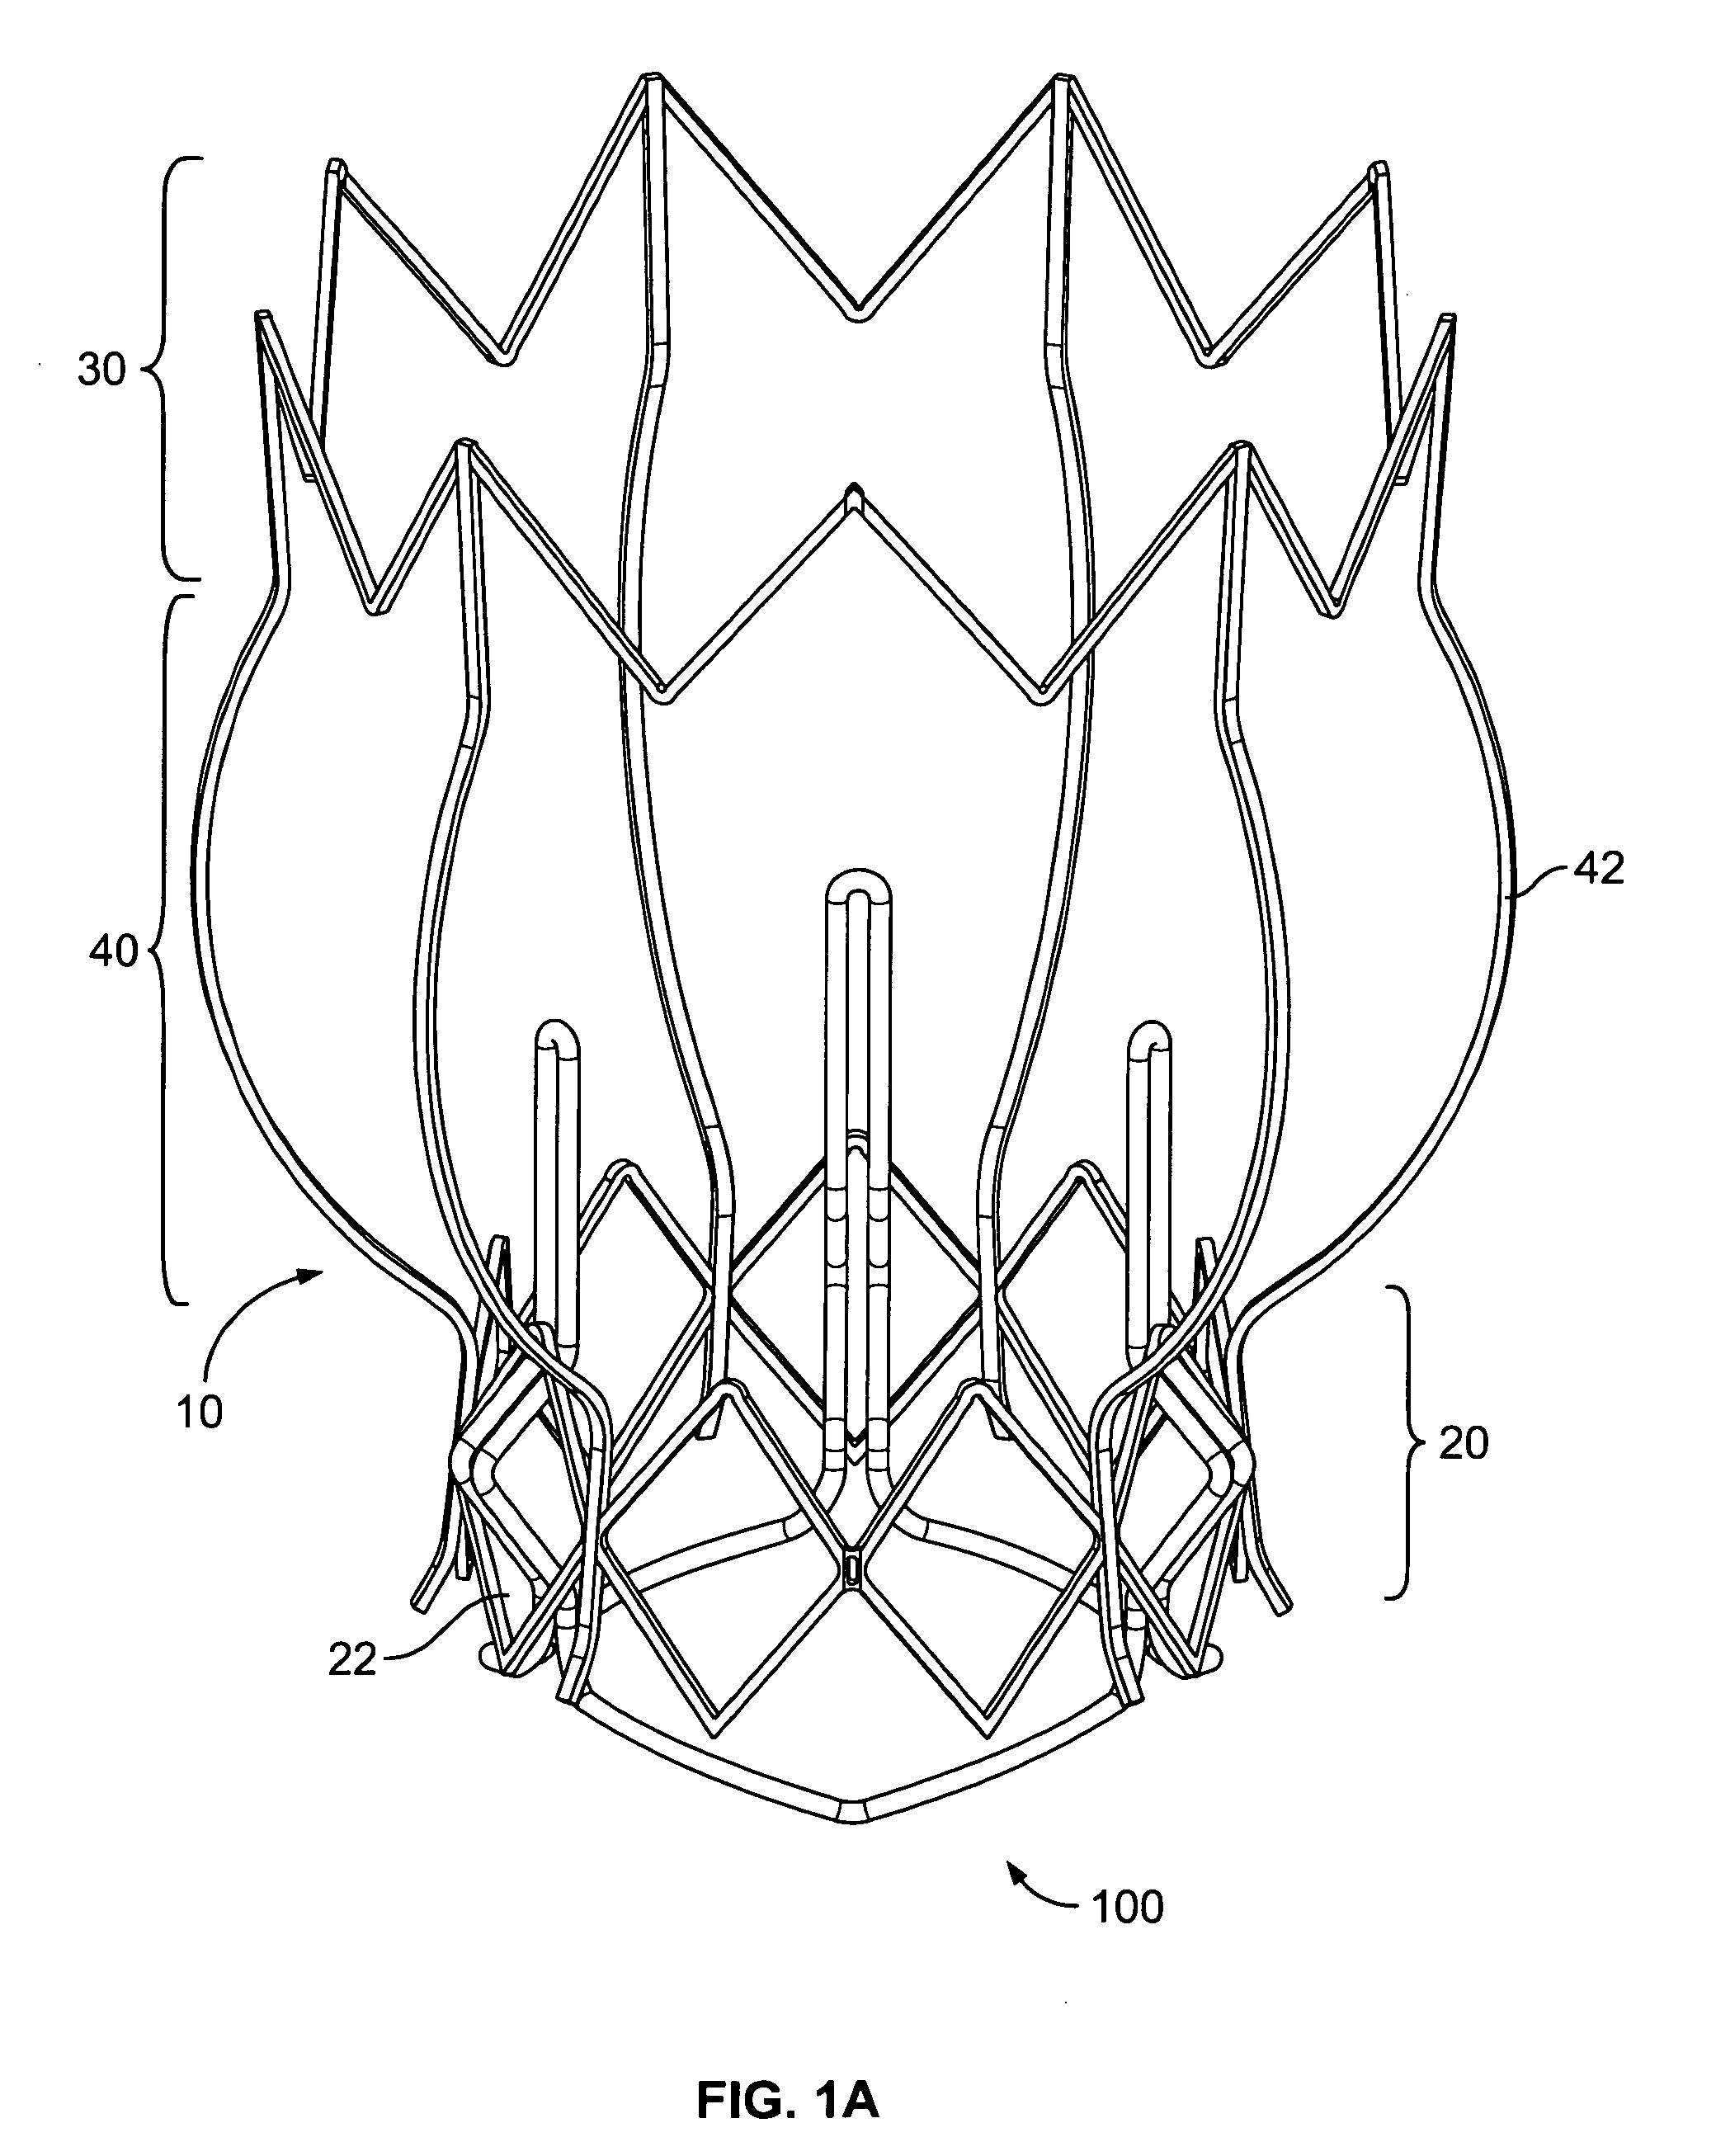 Two-stage collapsible/expandable prosthetic heart valves and anchoring systems